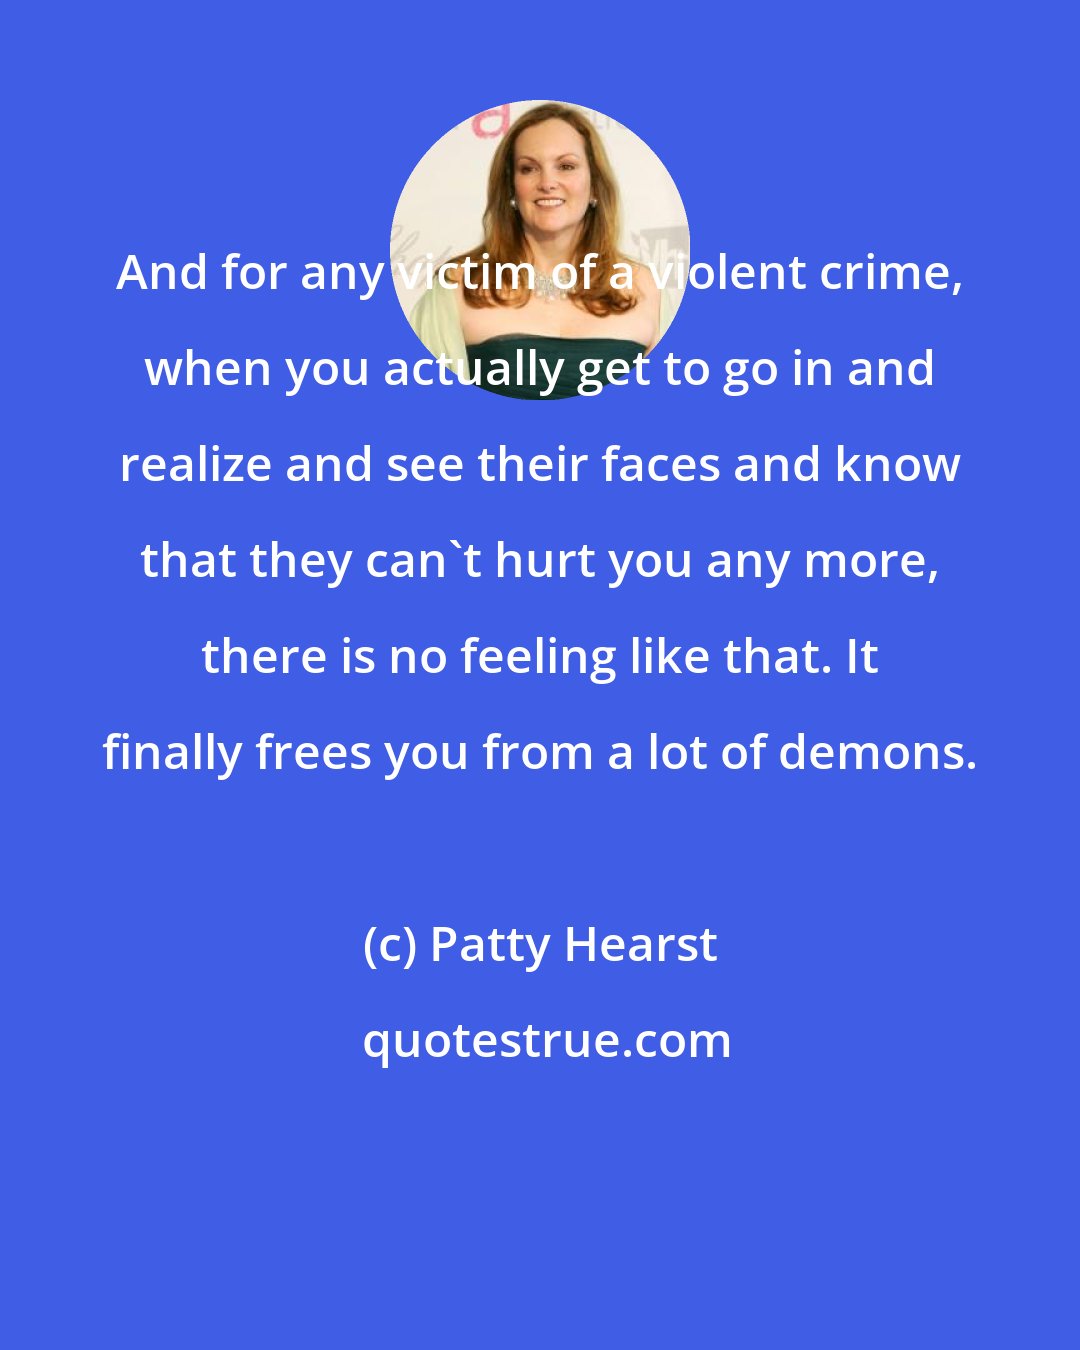 Patty Hearst: And for any victim of a violent crime, when you actually get to go in and realize and see their faces and know that they can't hurt you any more, there is no feeling like that. It finally frees you from a lot of demons.